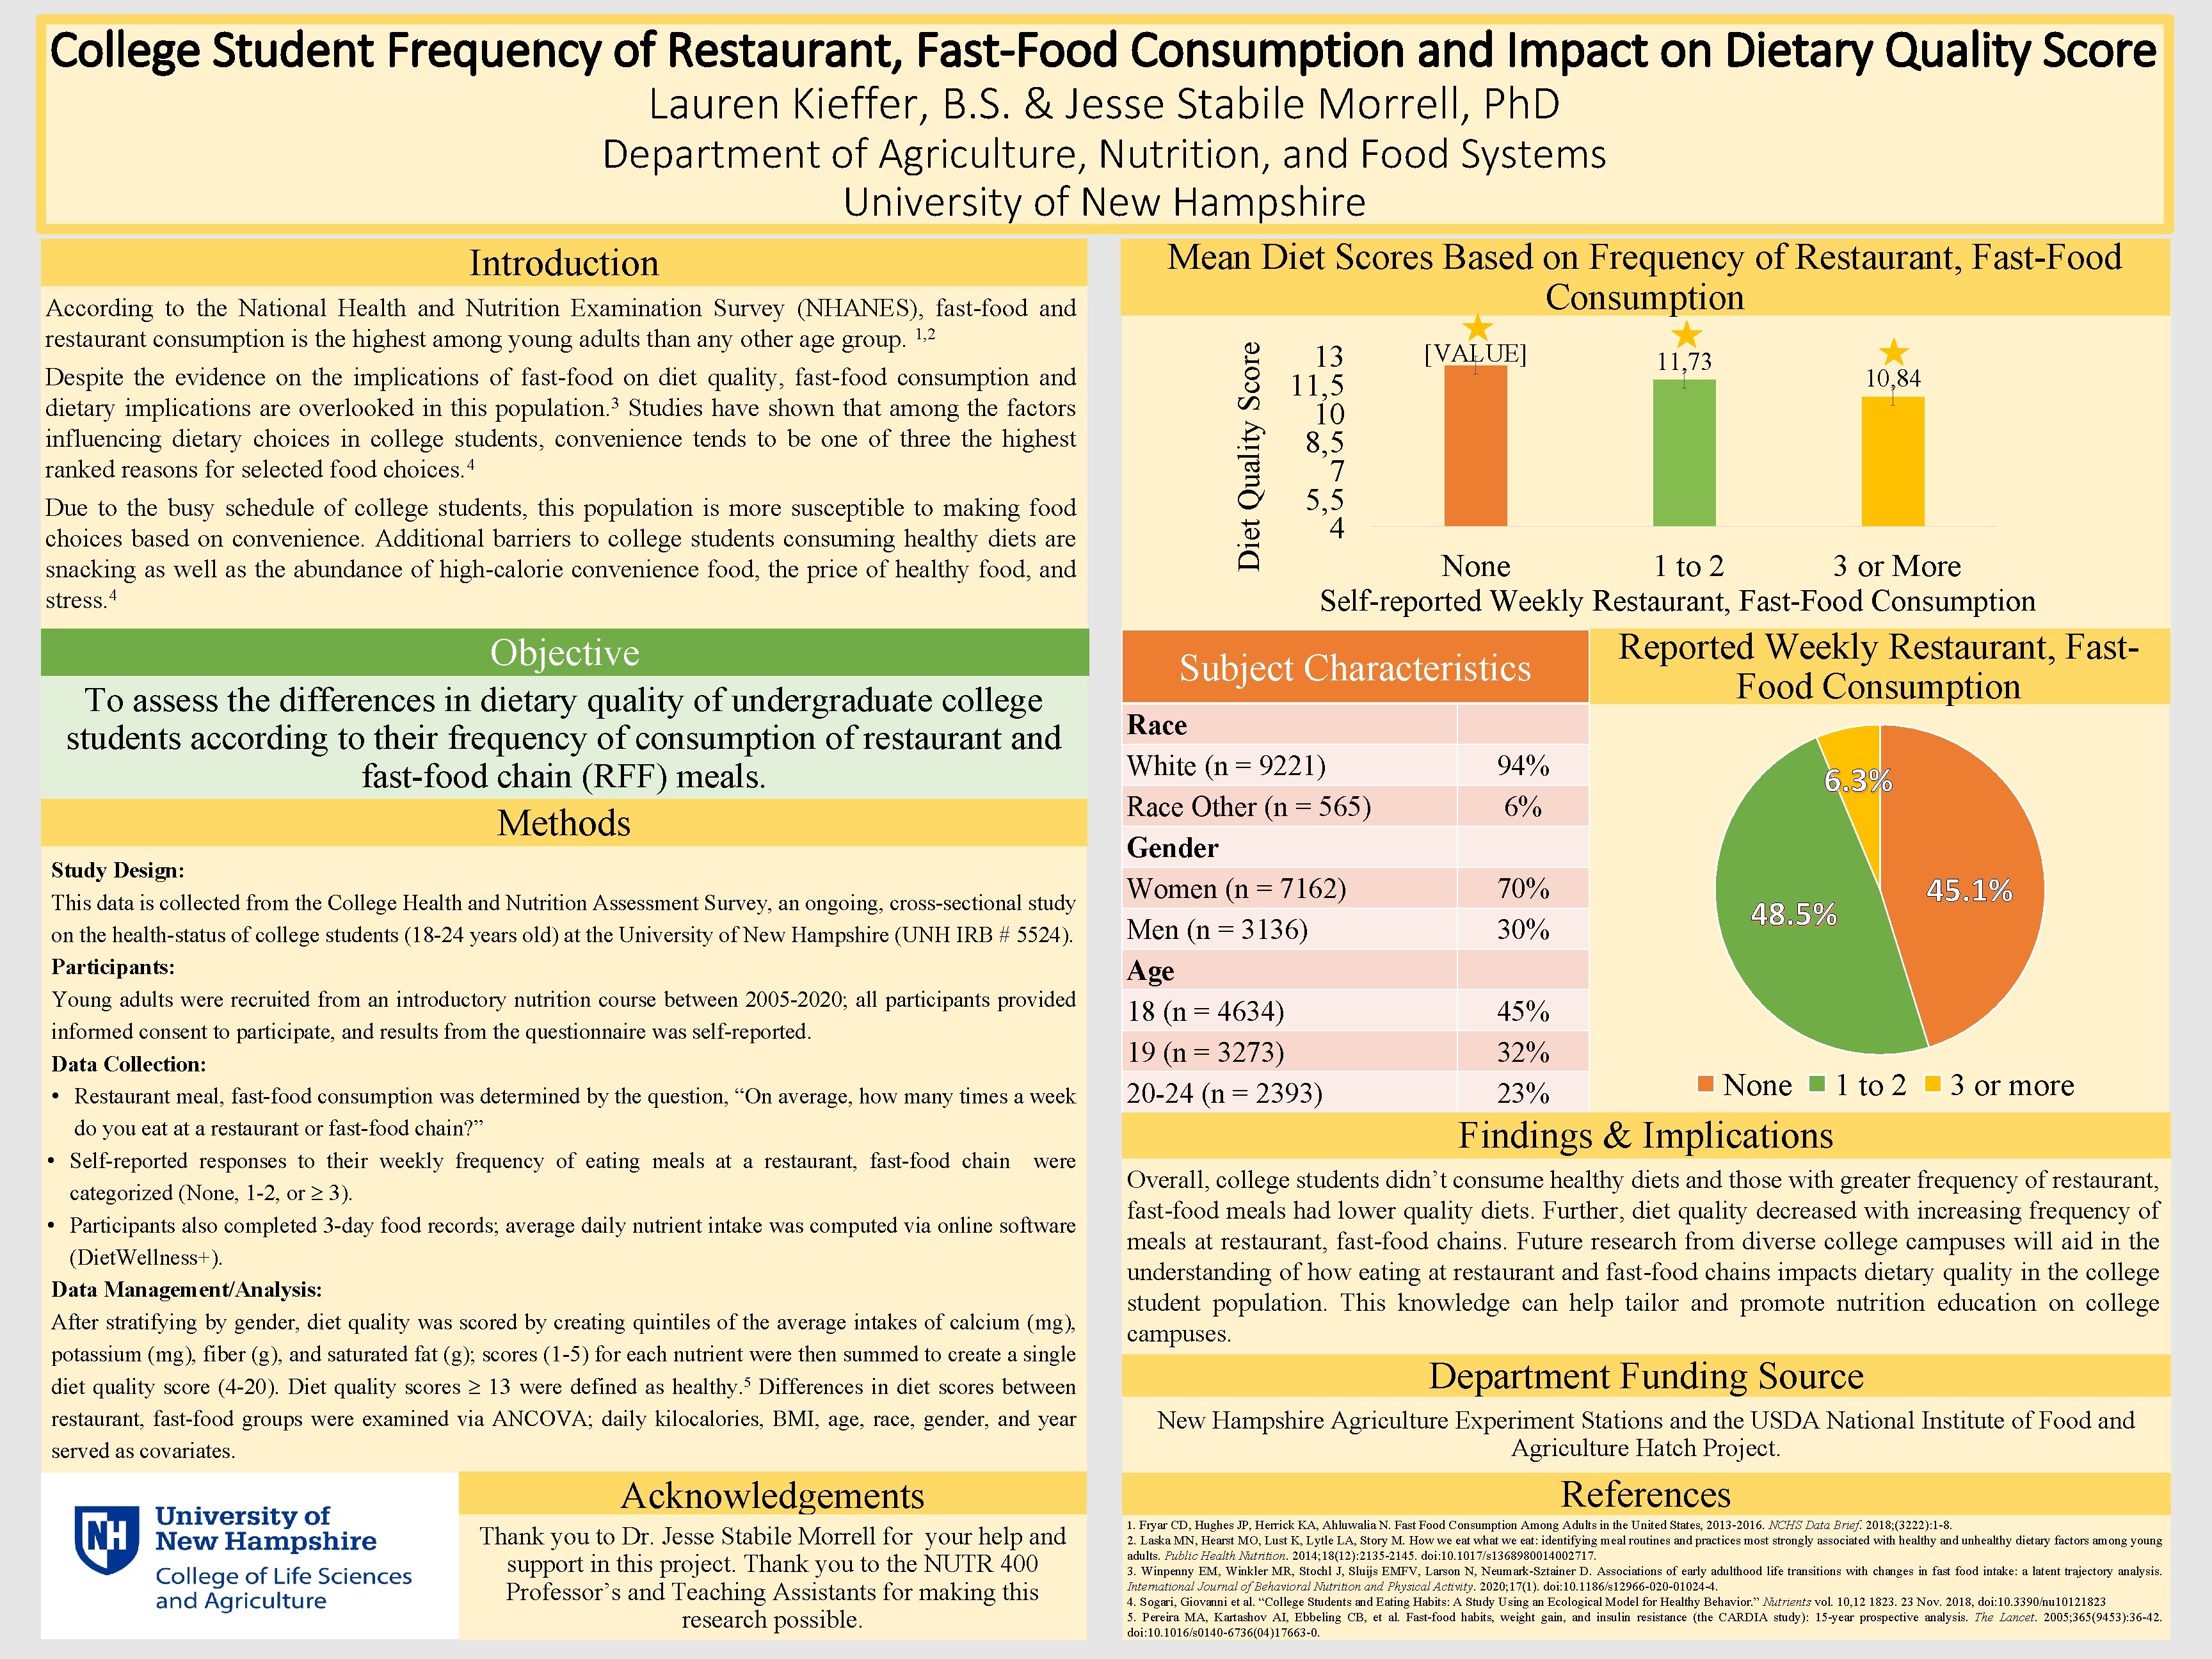 College Student Frequency of Restaurant, Fast-Food Consumption and Impact on Dietary Quality Score Lauren